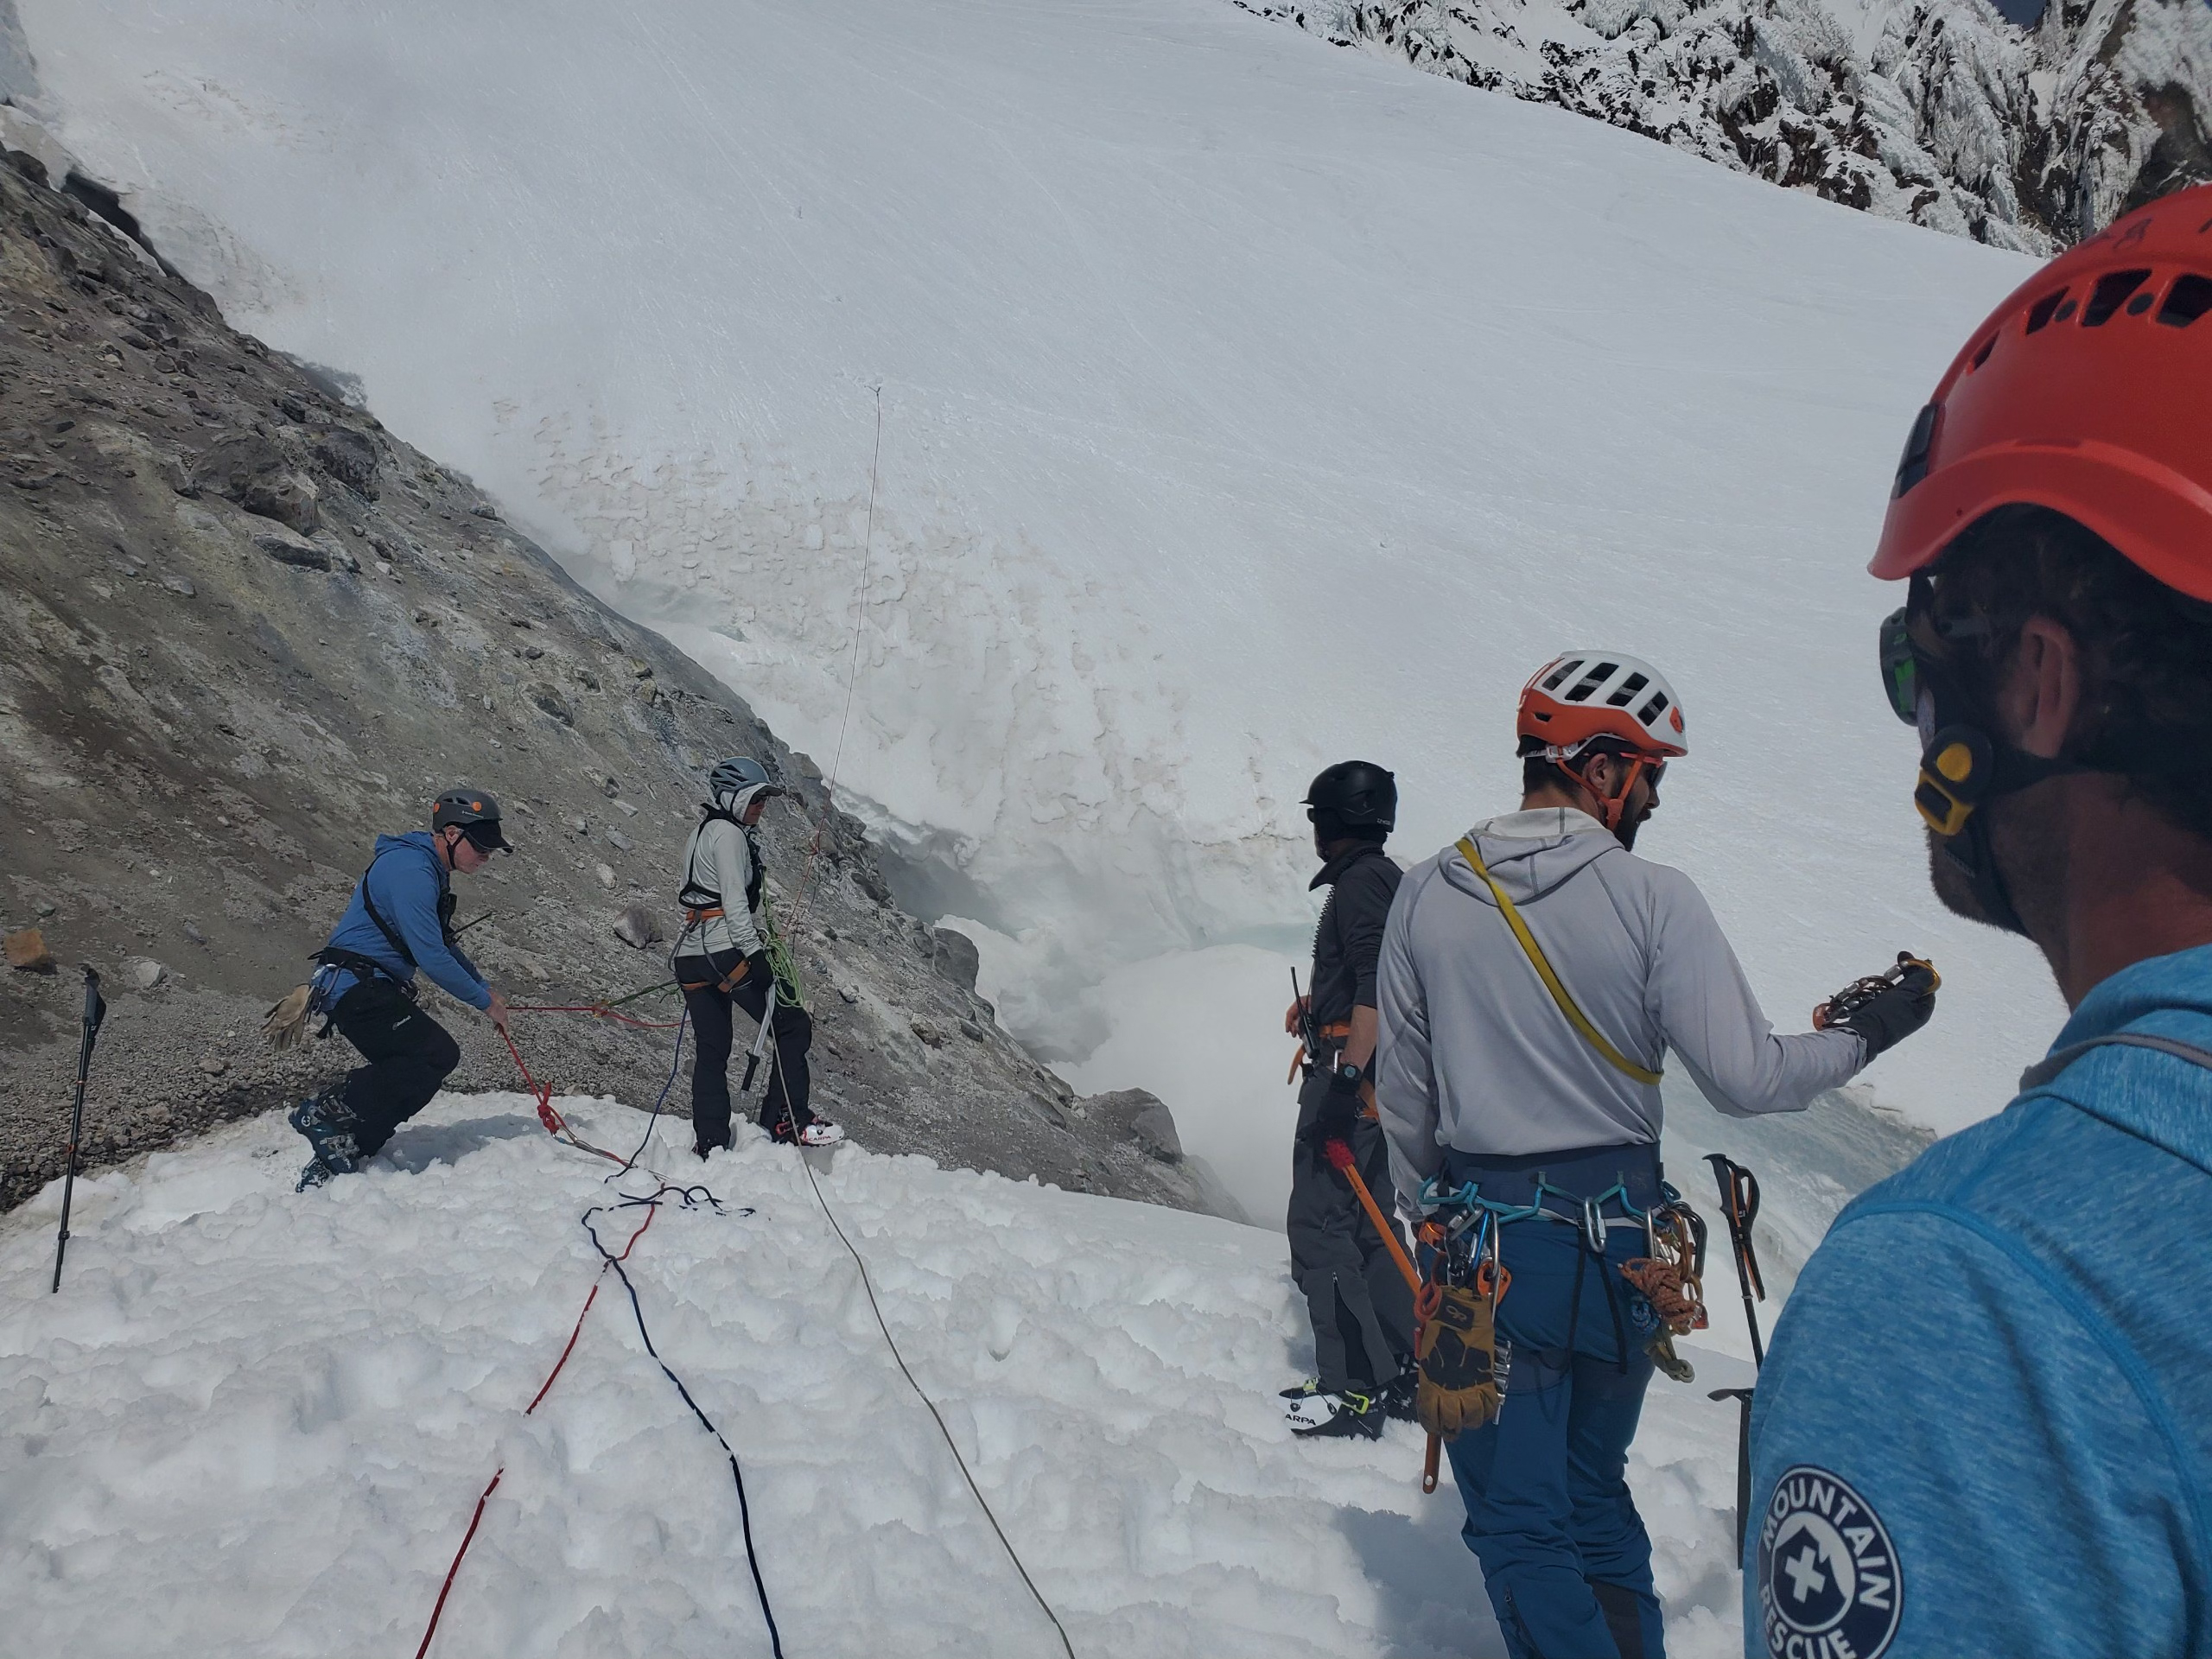 Rescue crews on Mount Hood begin descending a steep slope above where a climber fell to his death on Sunday morning.